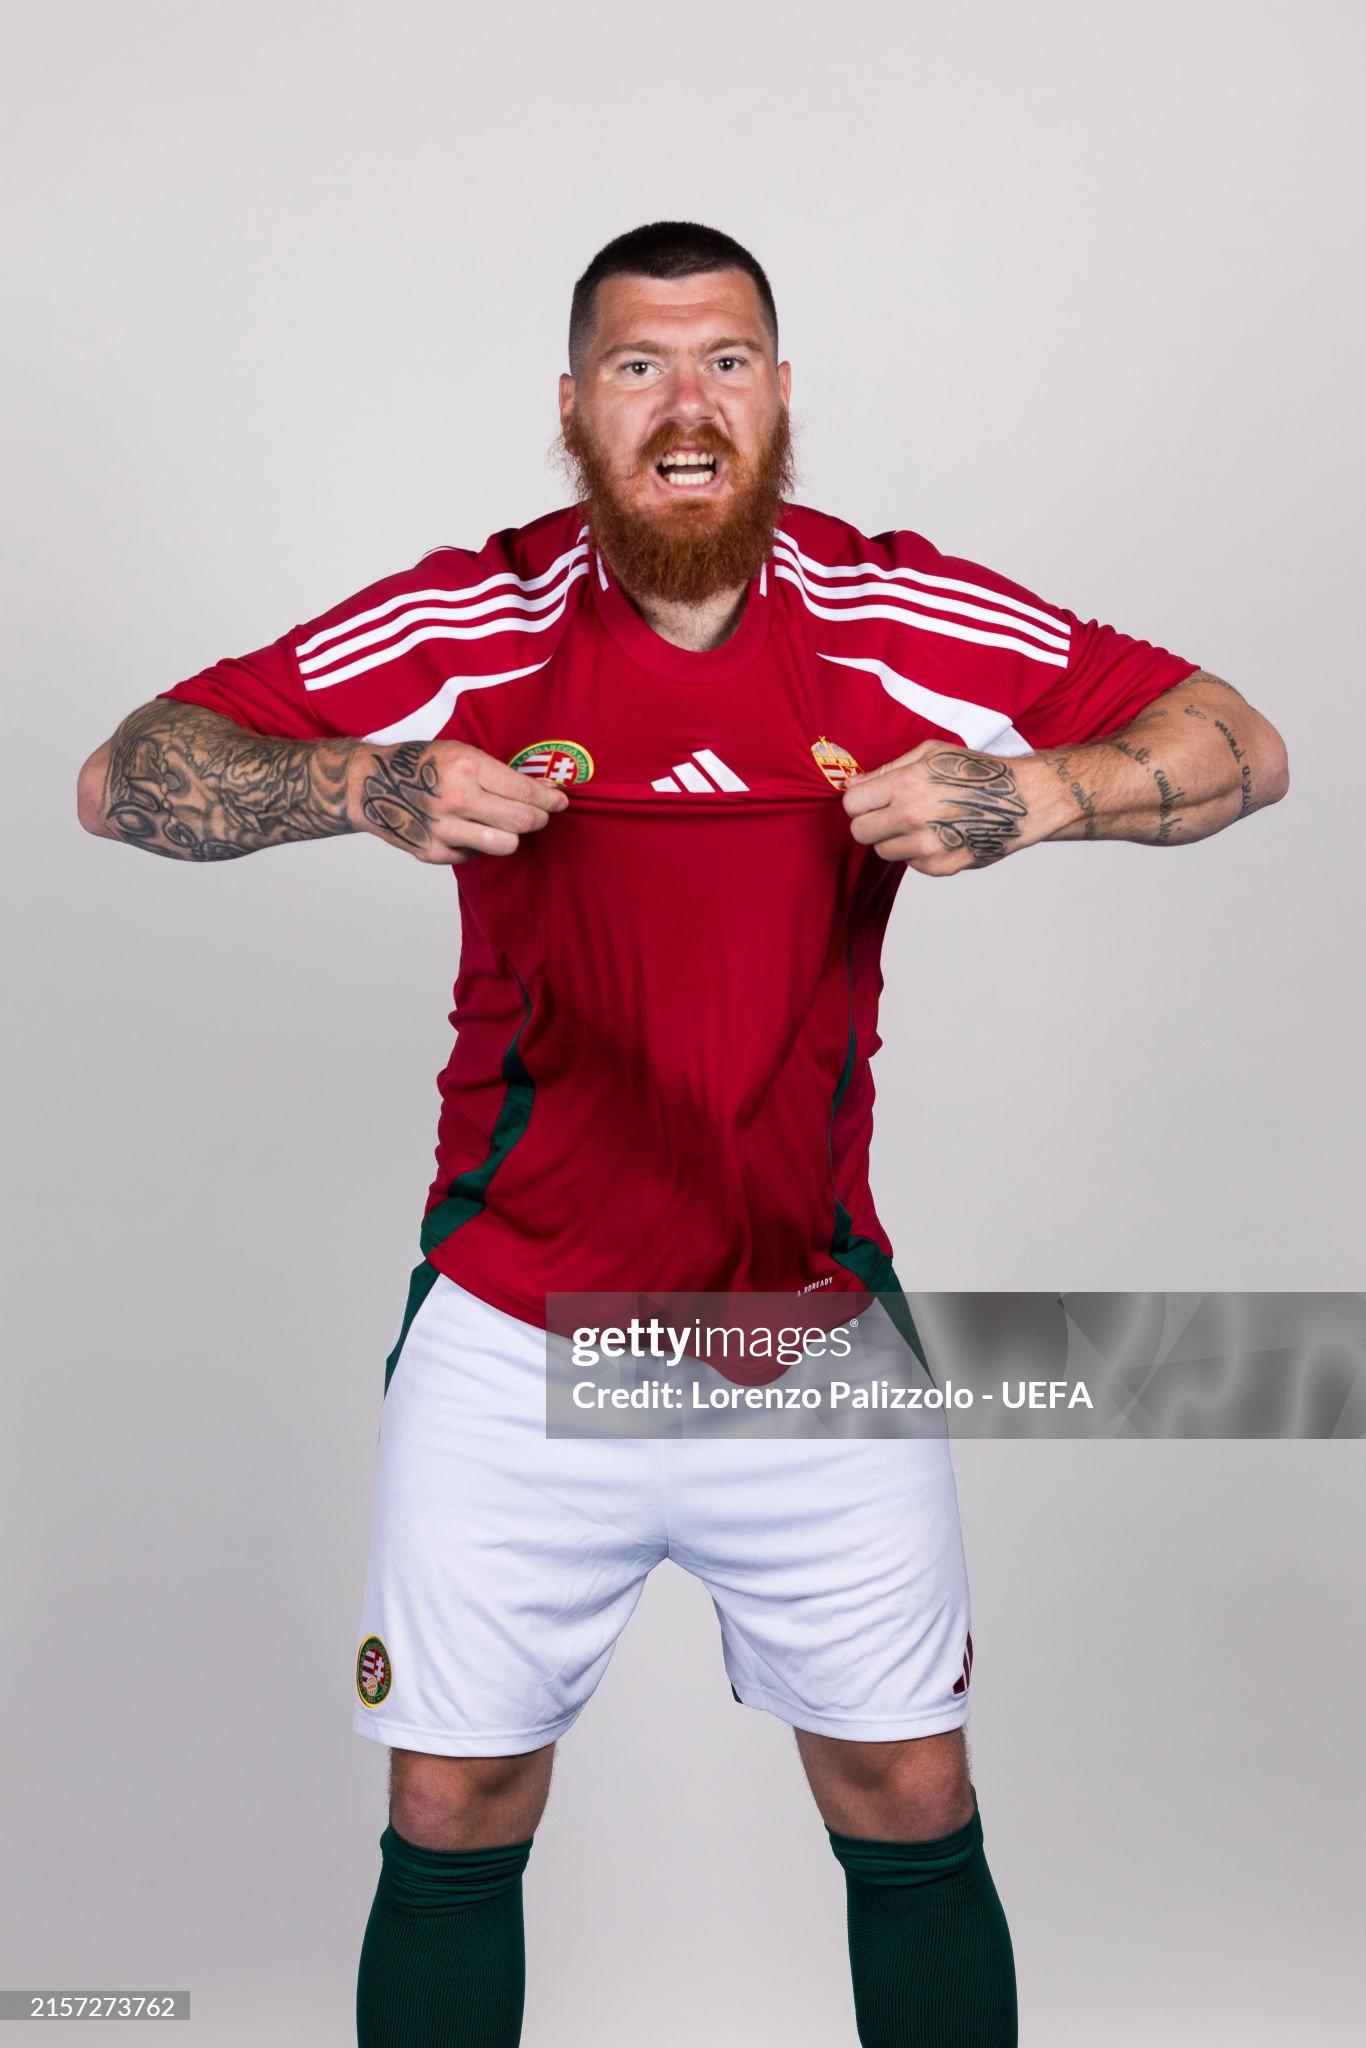 gettyimages-2157273762-2048x2048.jpg